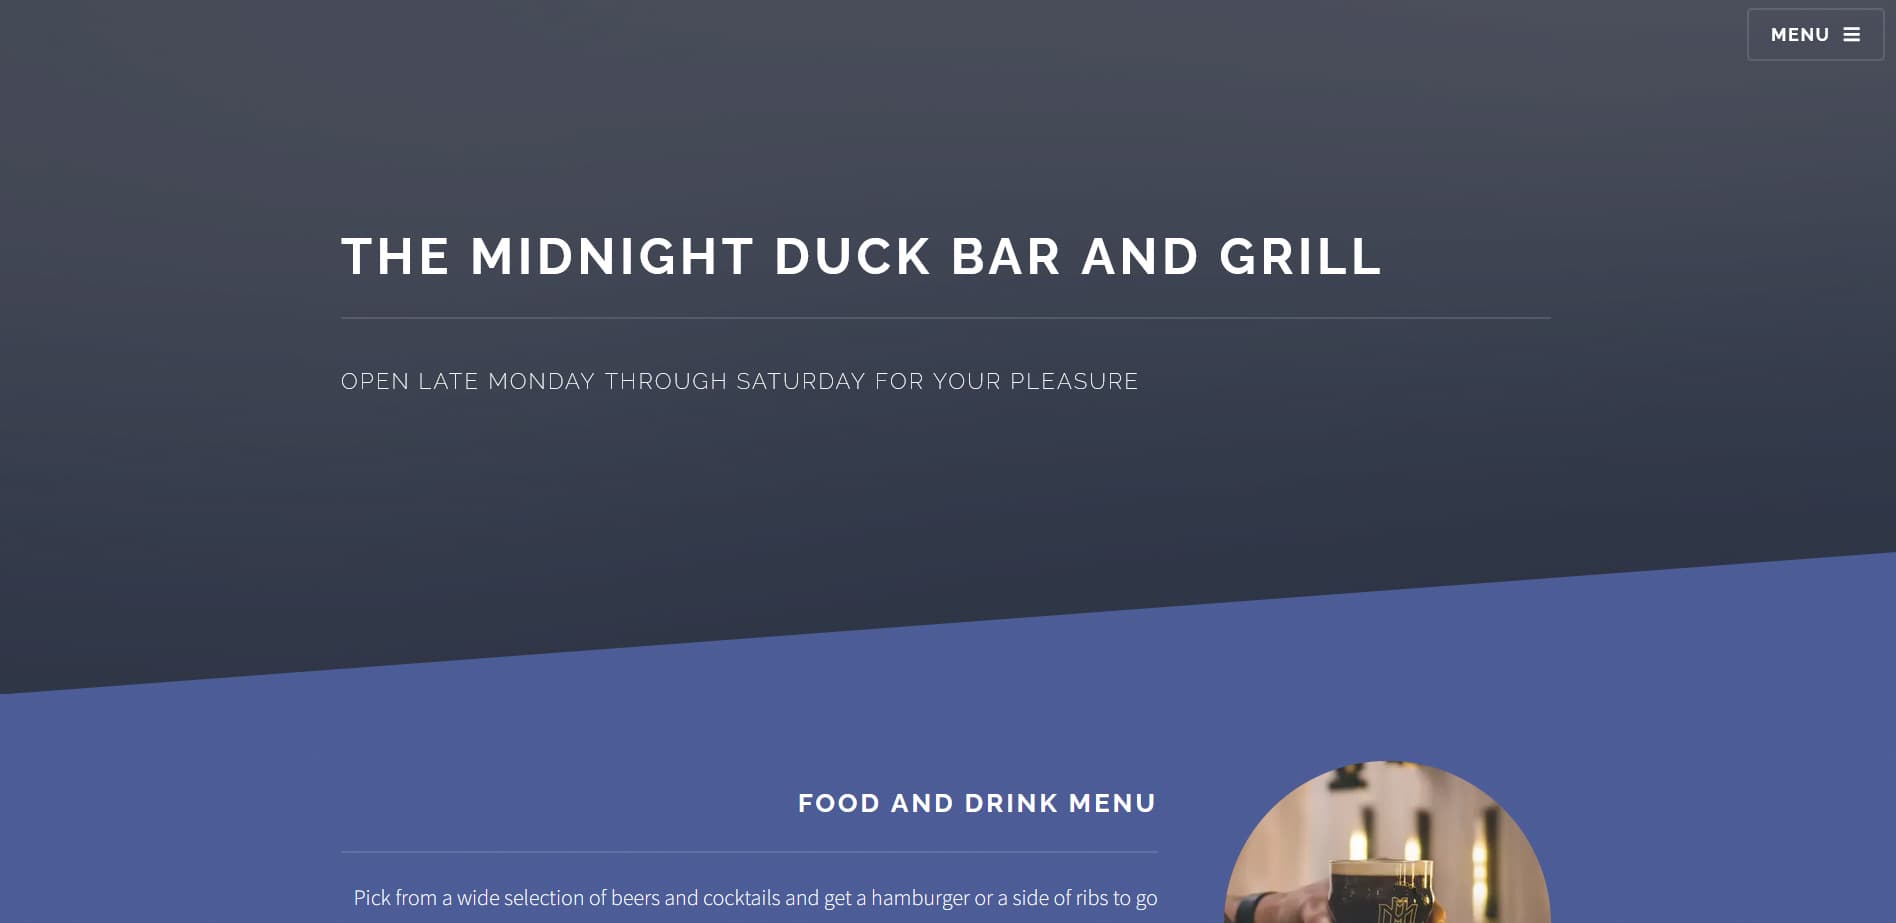 The Midnight Duck site. A food and drink menu section is visible below the title